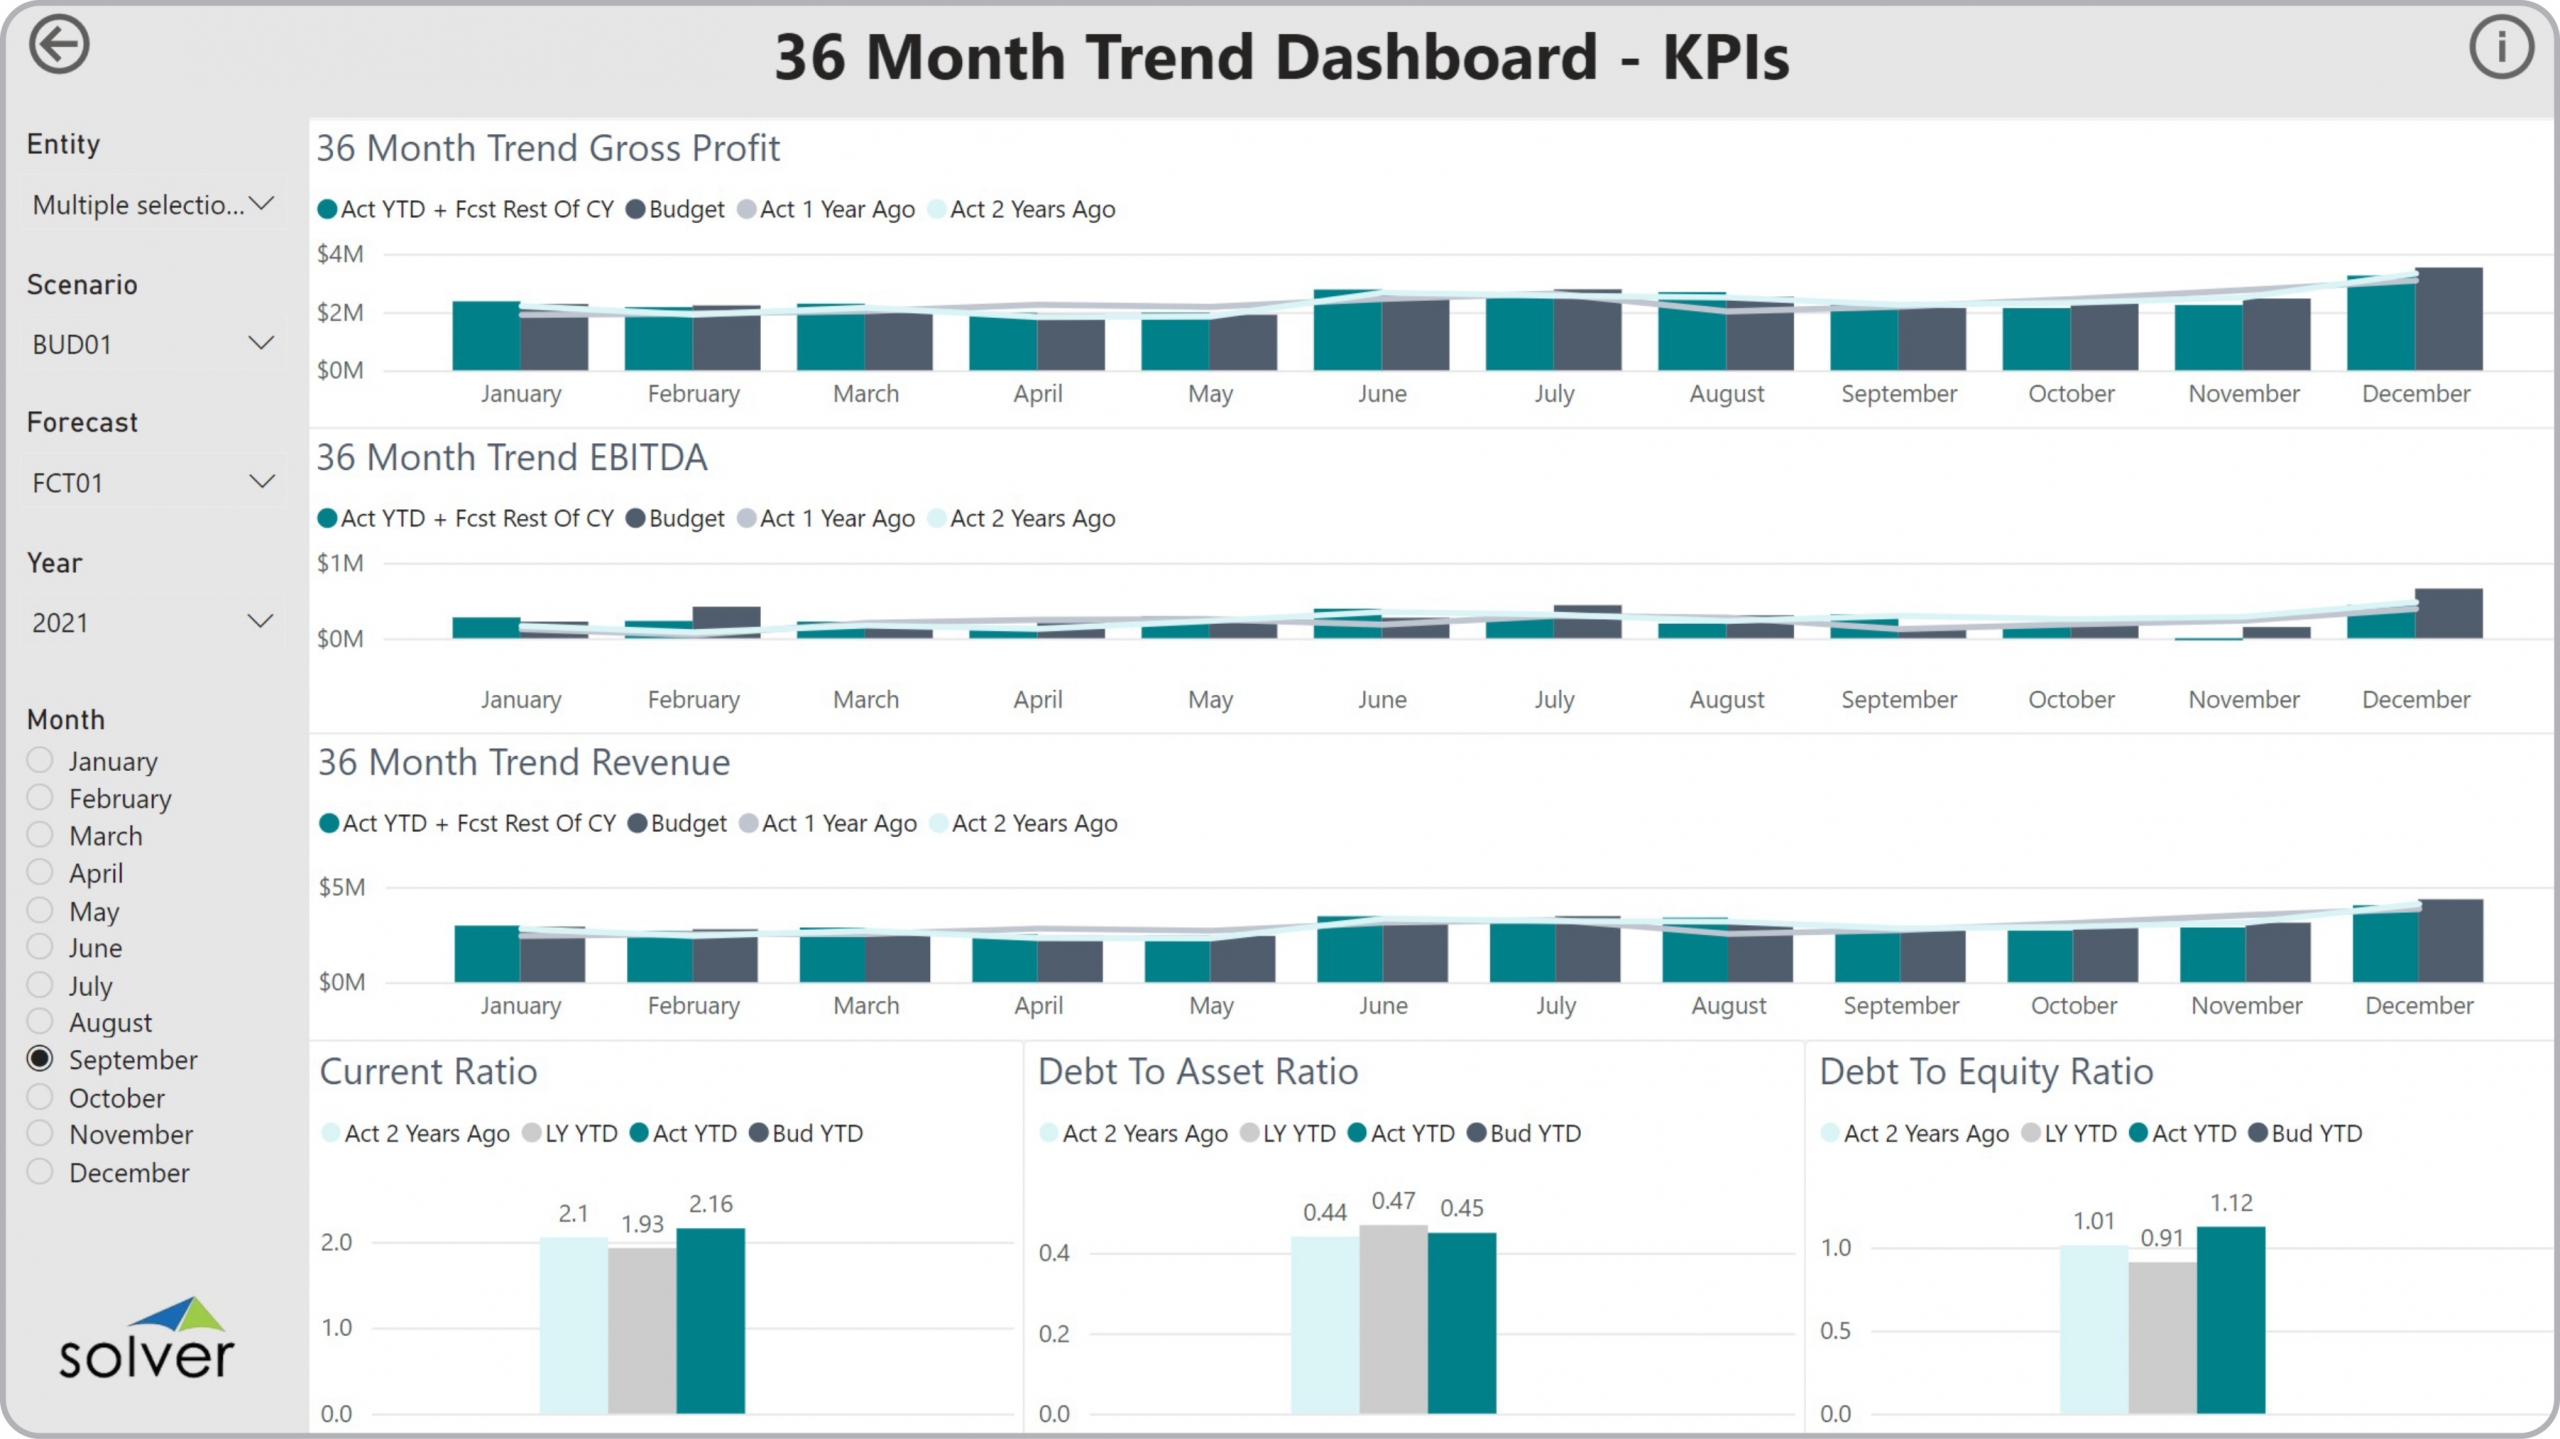 Example of a 36 Month KPI Trend Dashboard to Streamline the Monthly Reporting Process